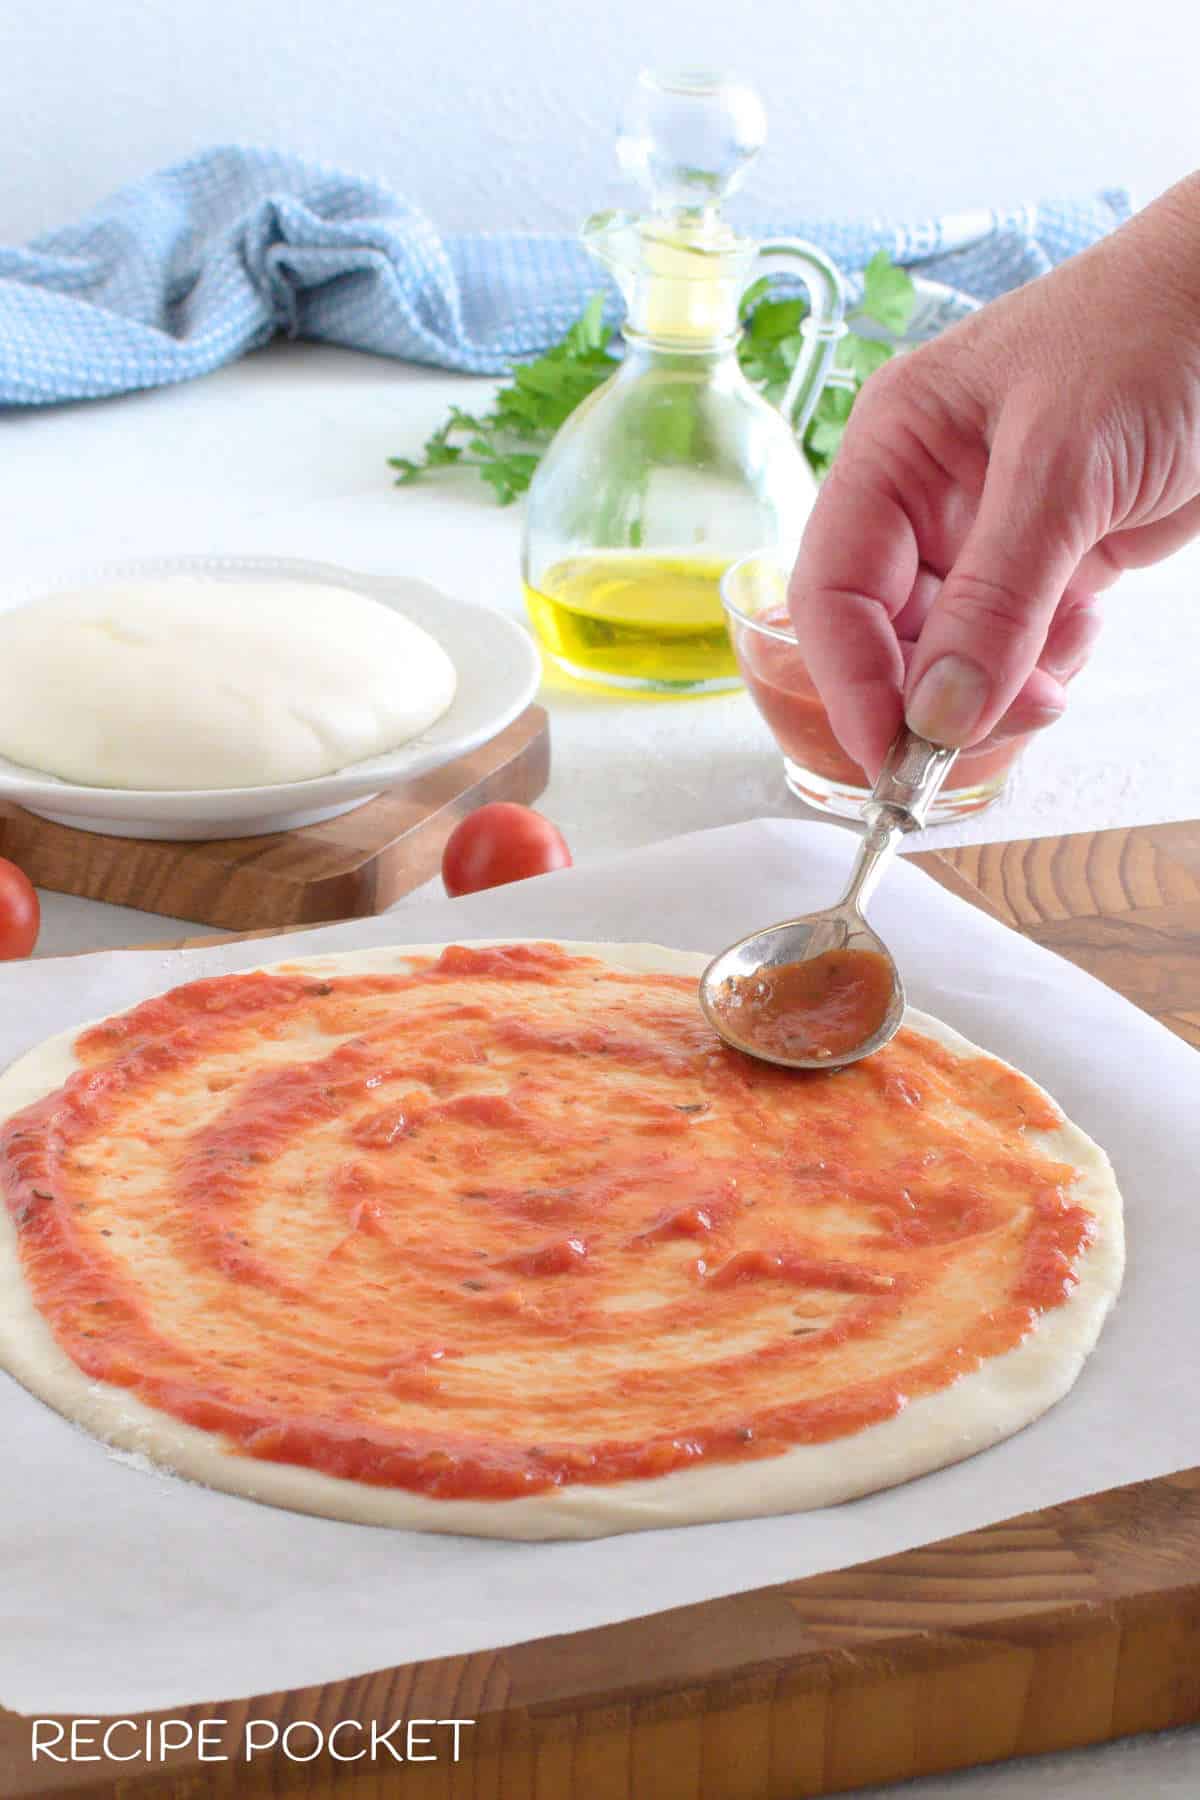 Pizza dough with sauce on top.